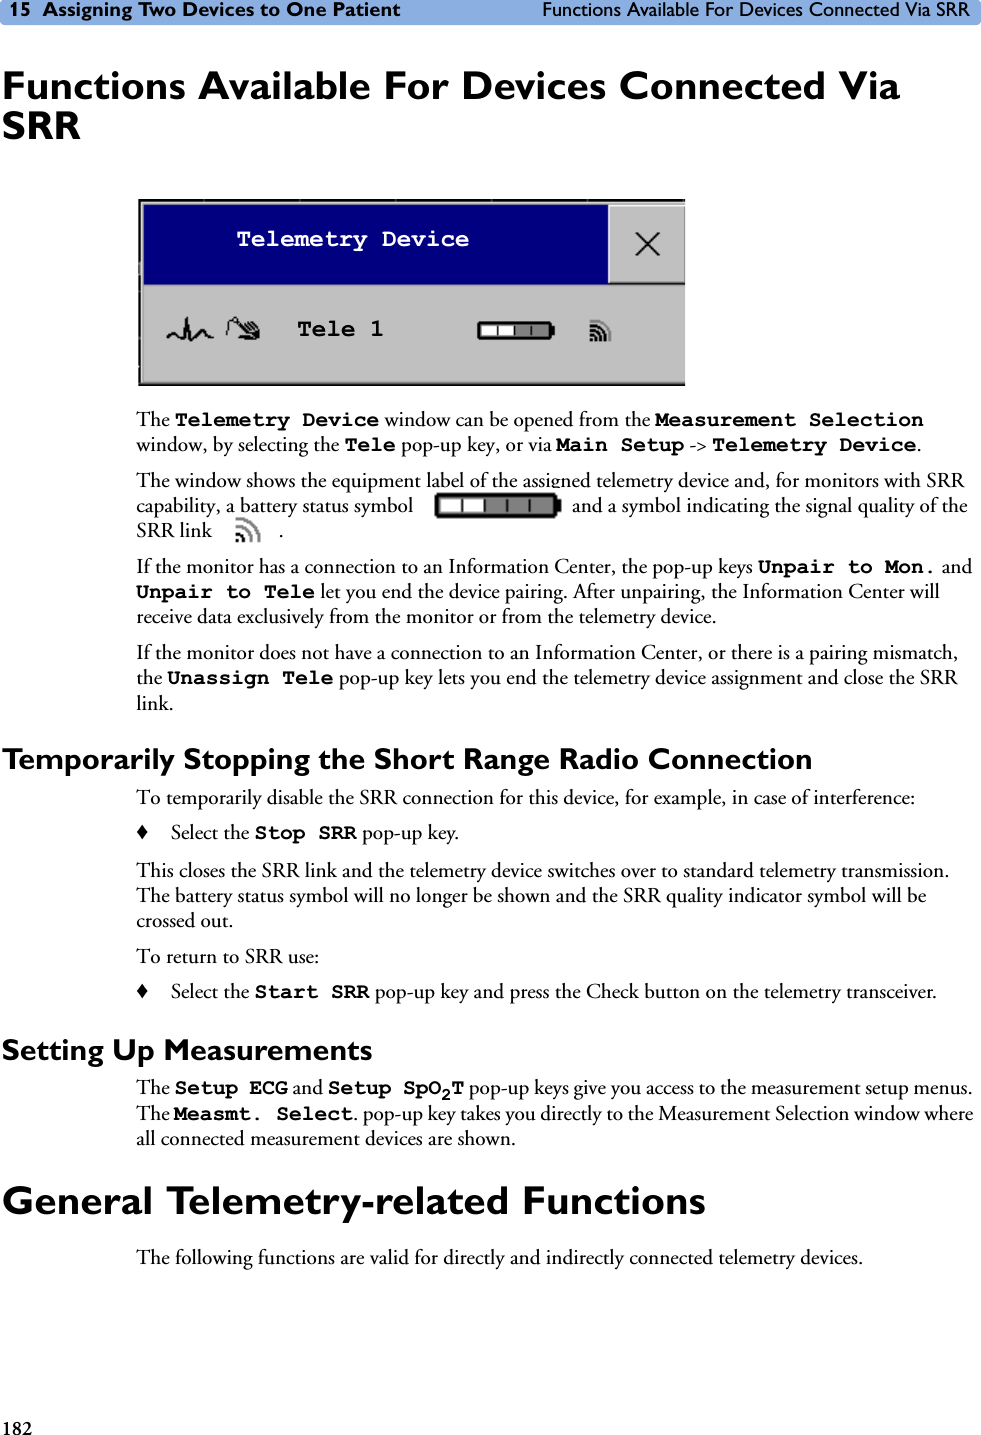 15 Assigning Two Devices to One Patient Functions Available For Devices Connected Via SRR182Functions Available For Devices Connected Via SRRThe Telemetry Device window can be opened from the Measurement Selection window, by selecting the Tele pop-up key, or via Main Setup -&gt; Telemetry Device.The window shows the equipment label of the assigned telemetry device and, for monitors with SRR capability, a battery status symbol   and a symbol indicating the signal quality of the SRR link  . If the monitor has a connection to an Information Center, the pop-up keys Unpair to Mon. and Unpair to Tele let you end the device pairing. After unpairing, the Information Center will receive data exclusively from the monitor or from the telemetry device.If the monitor does not have a connection to an Information Center, or there is a pairing mismatch, the Unassign Tele pop-up key lets you end the telemetry device assignment and close the SRR link.Temporarily Stopping the Short Range Radio ConnectionTo temporarily disable the SRR connection for this device, for example, in case of interference:♦Select the Stop SRR pop-up key.This closes the SRR link and the telemetry device switches over to standard telemetry transmission. The battery status symbol will no longer be shown and the SRR quality indicator symbol will be crossed out.To return to SRR use:♦Select the Start SRR pop-up key and press the Check button on the telemetry transceiver.Setting Up MeasurementsThe Setup ECG and Setup SpO2T pop-up keys give you access to the measurement setup menus. The Measmt. Select. pop-up key takes you directly to the Measurement Selection window where all connected measurement devices are shown.General Telemetry-related FunctionsThe following functions are valid for directly and indirectly connected telemetry devices.Telemetry DeviceTele 1